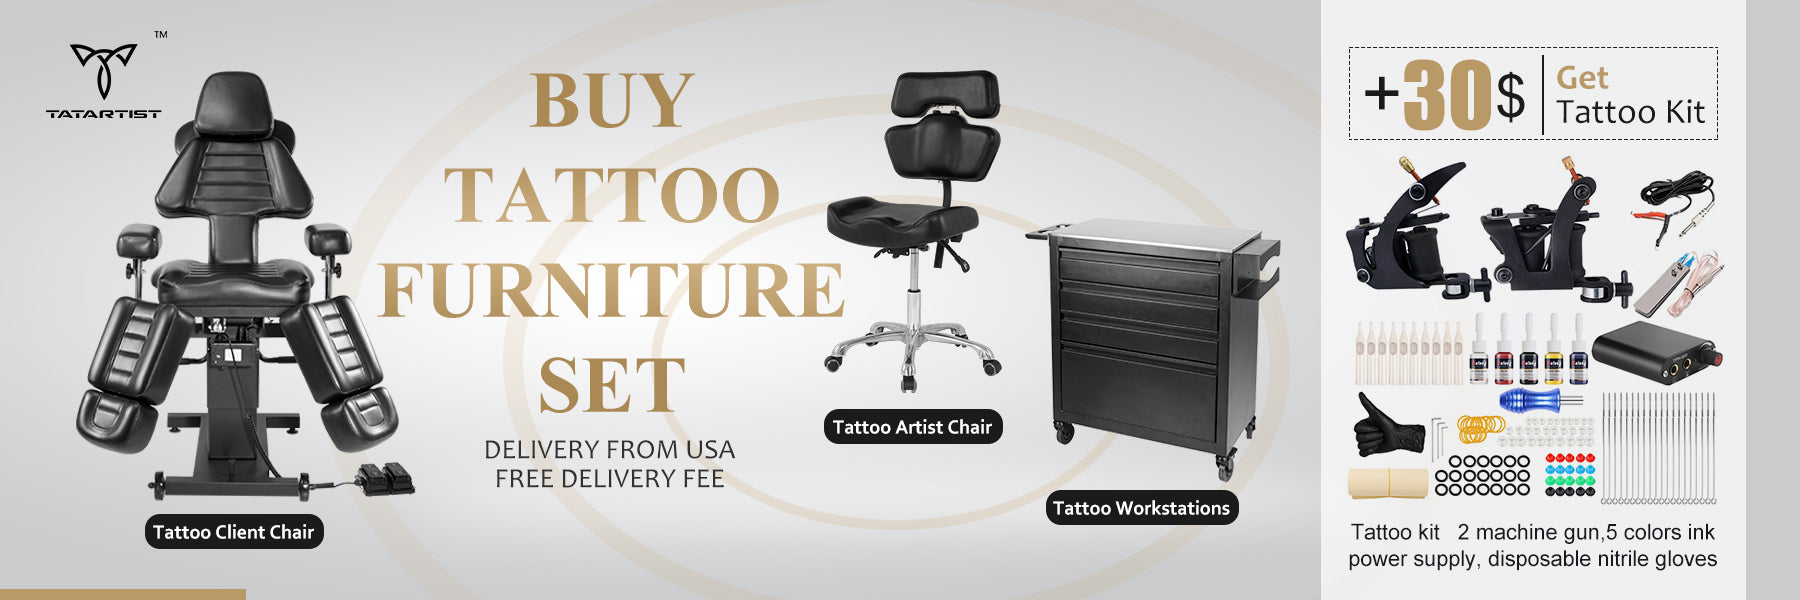 TatArtrist Chair suitable for worldwide tattoo studios